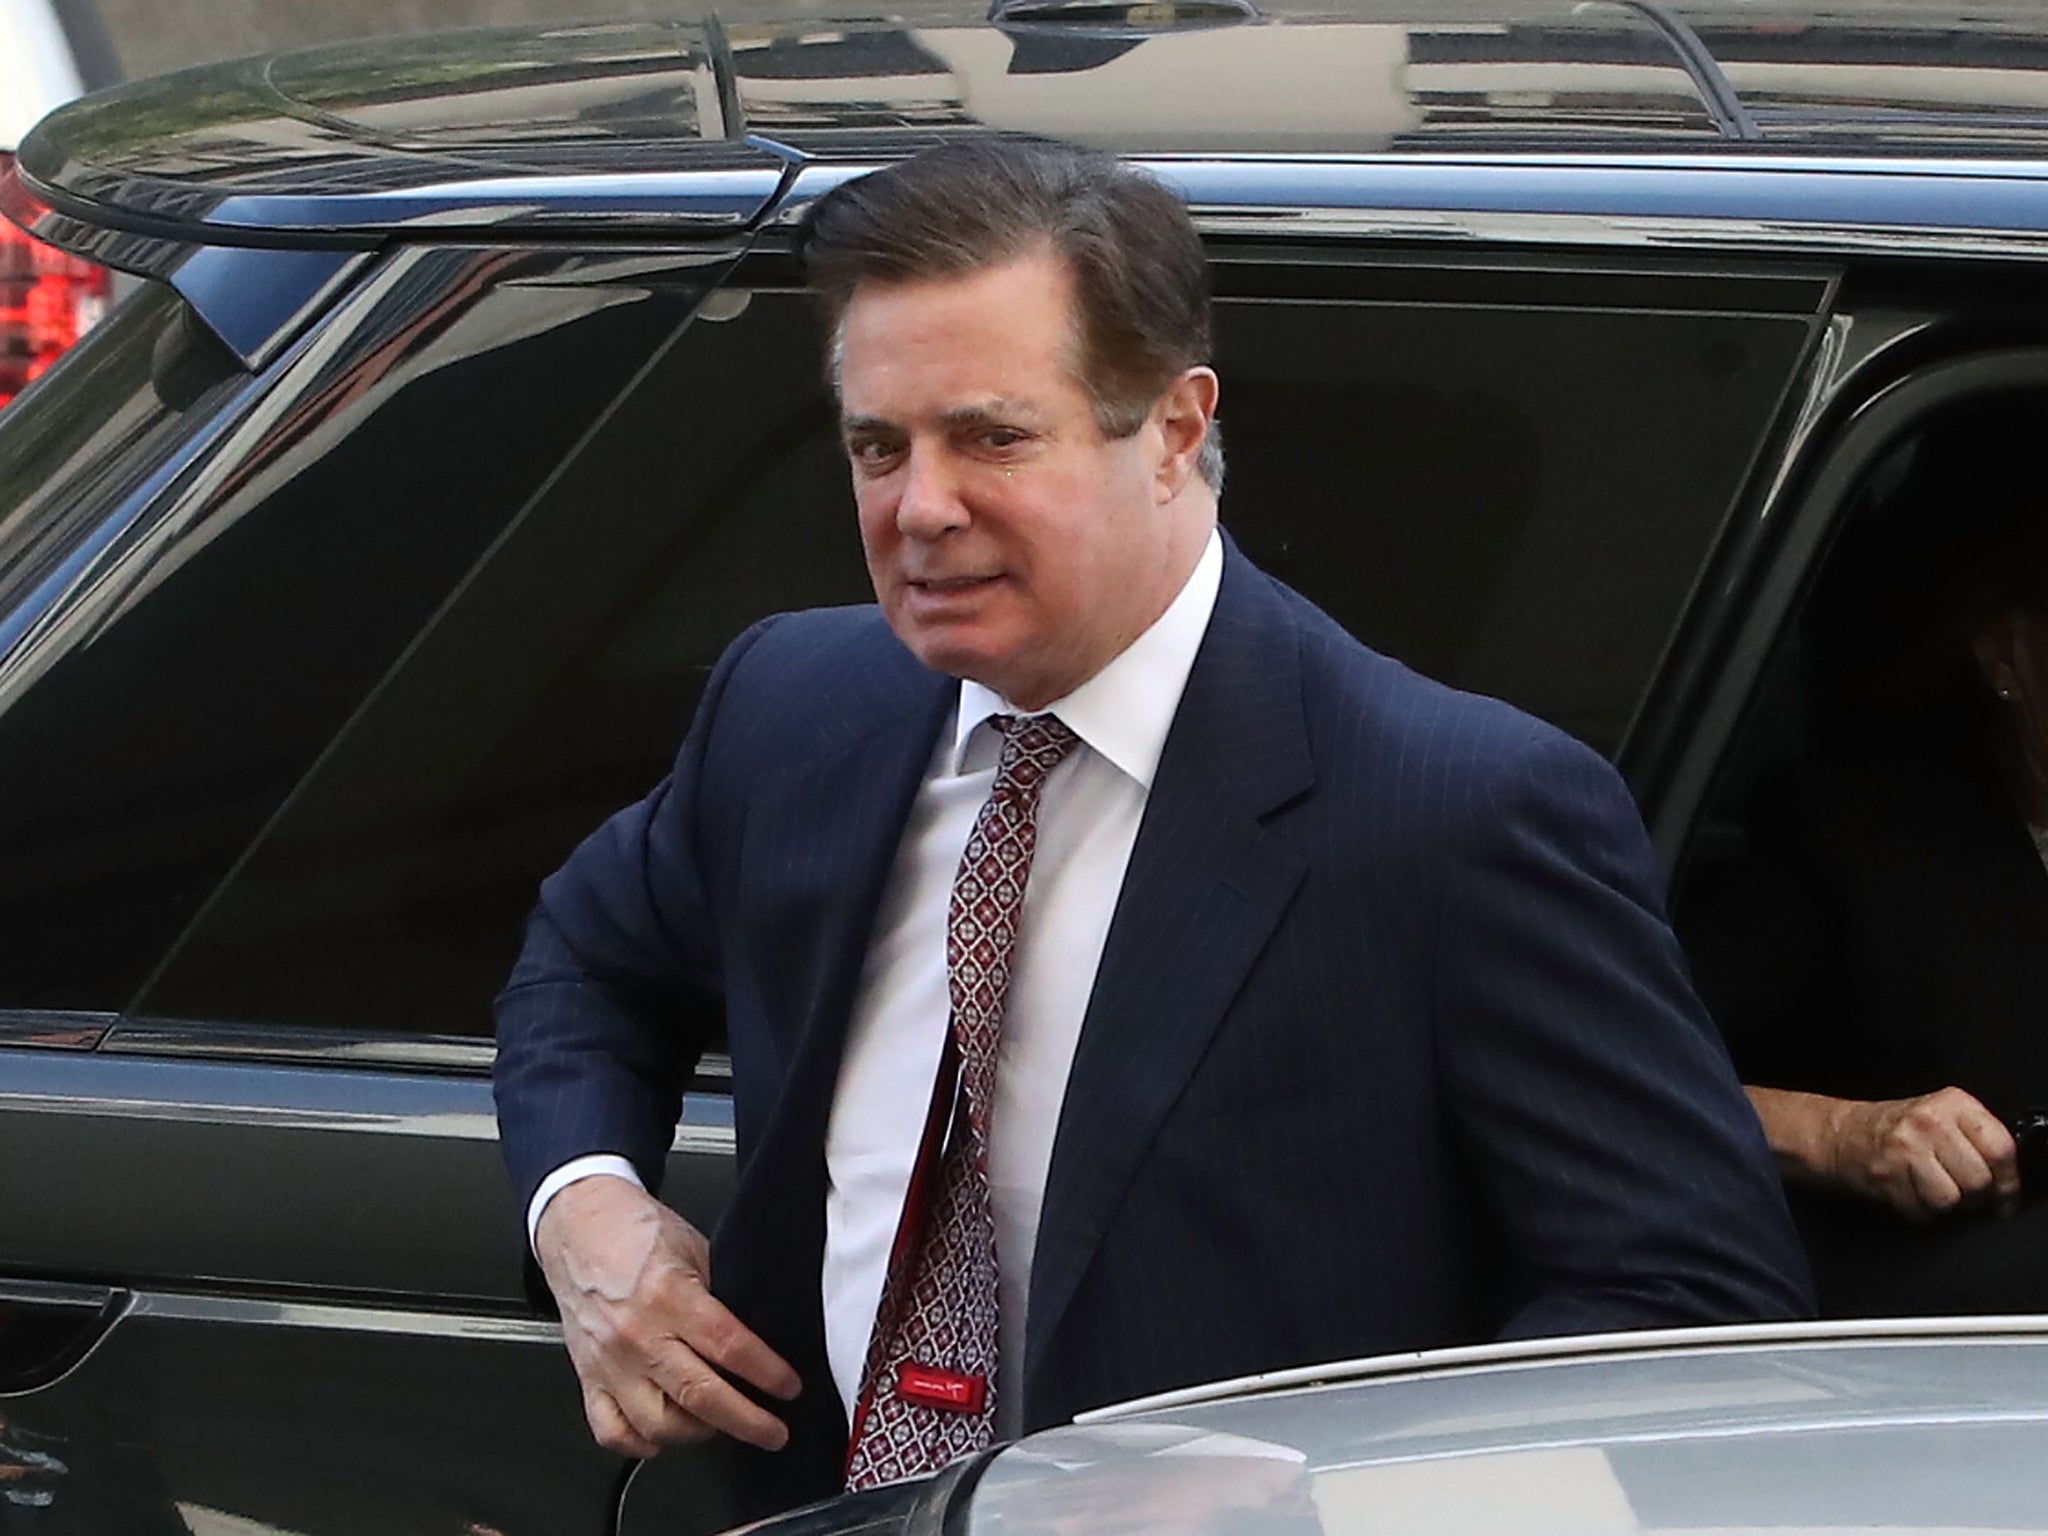 Manafort trial - live updates: Robert Mueller&apos;s team ask Rick Gates discussion to be kept secret to protect Russia investigation